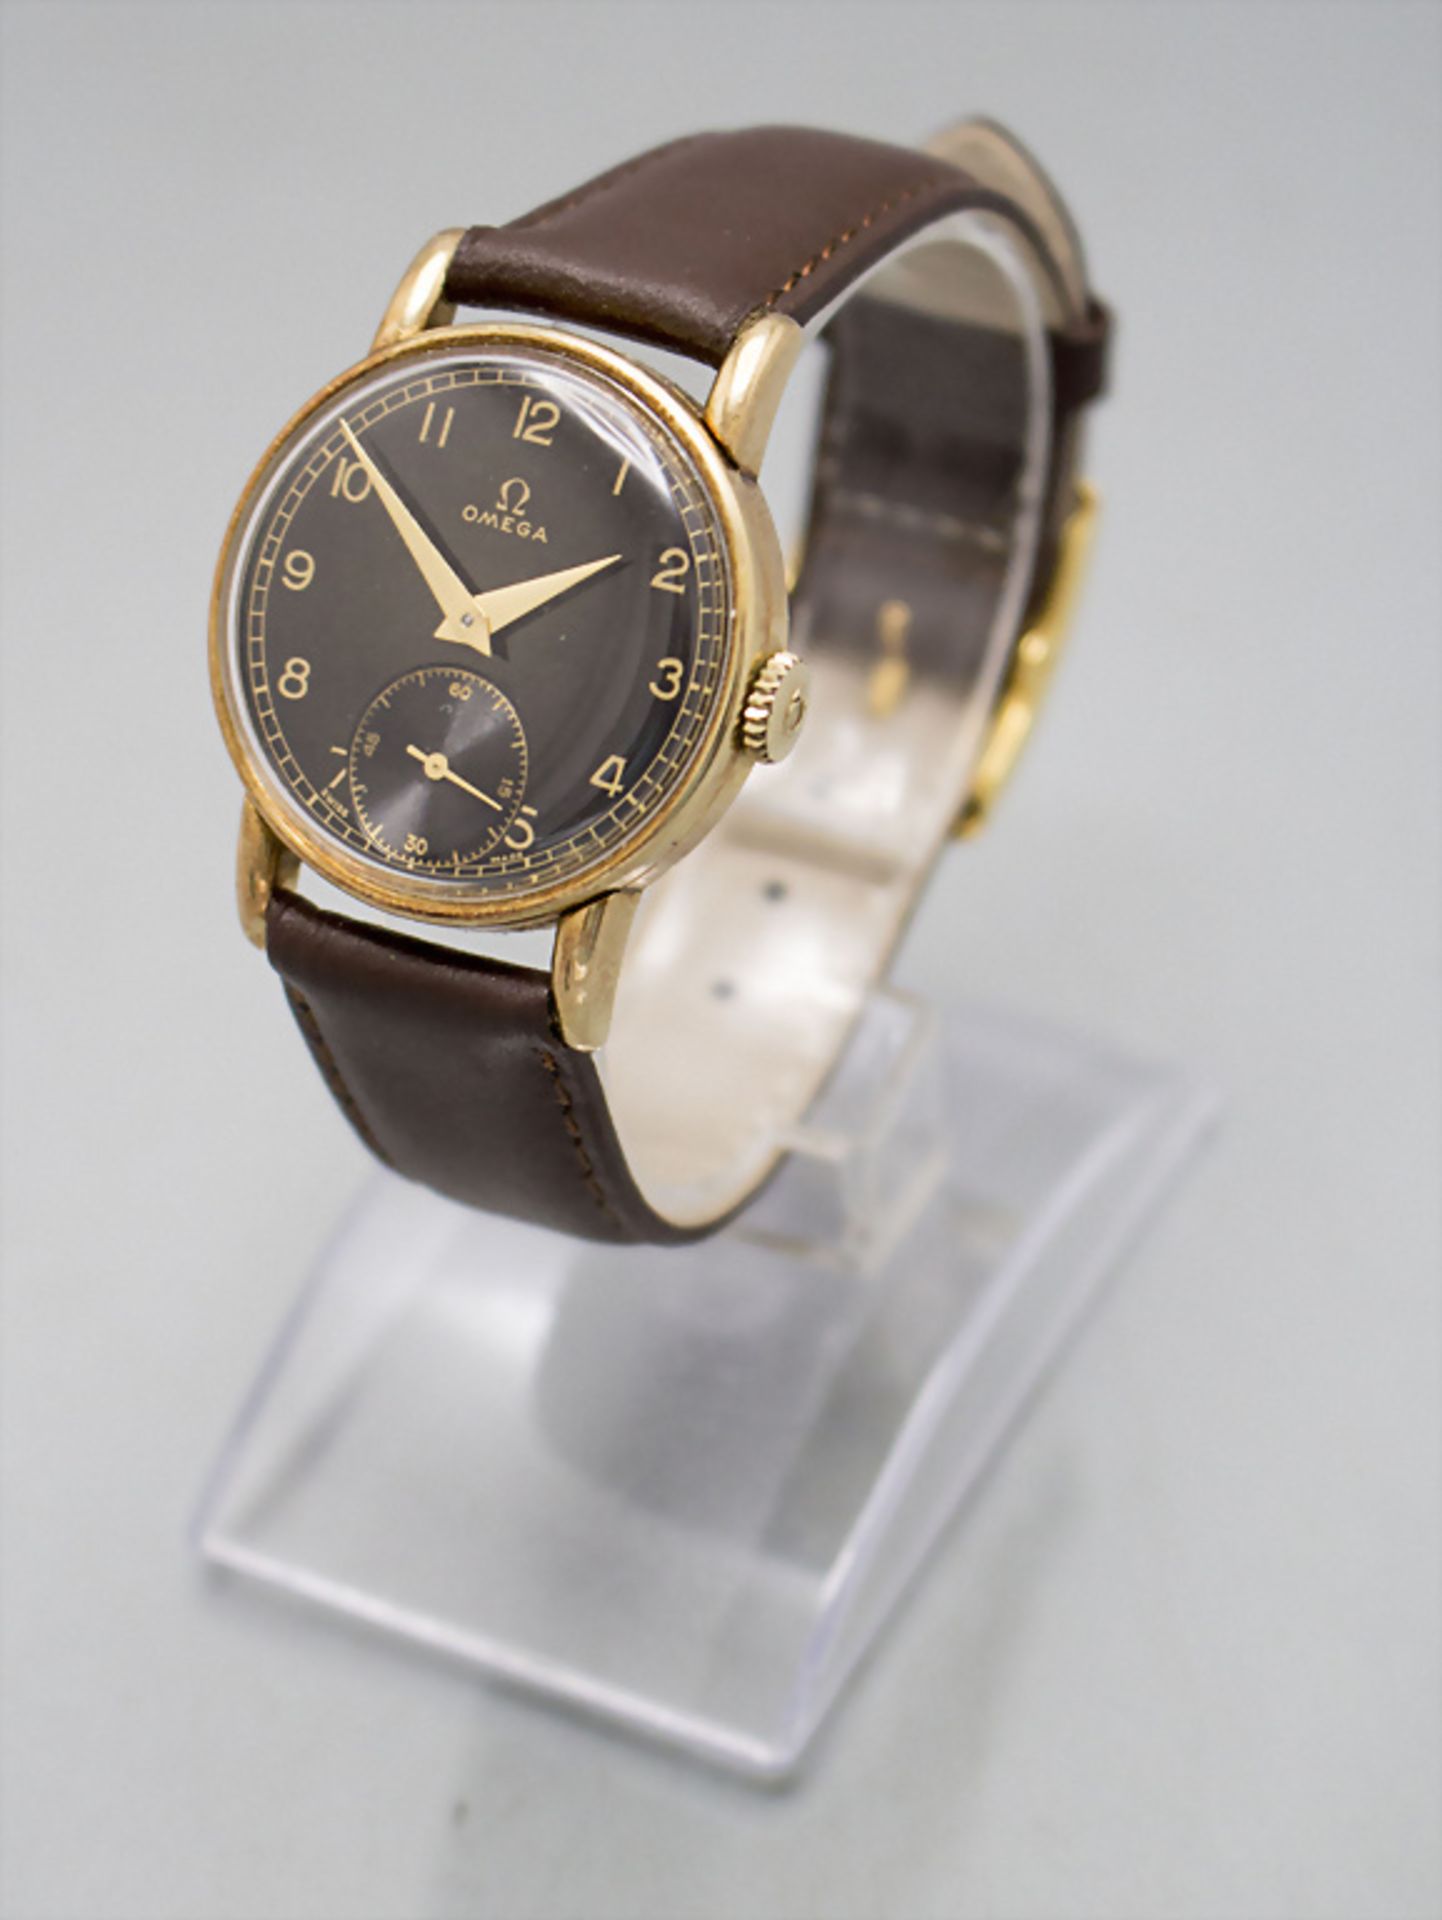 Beobachtungsuhr / A military 14 ct gold watch, Omega, Swiss, um 1939-1944 - Image 3 of 7